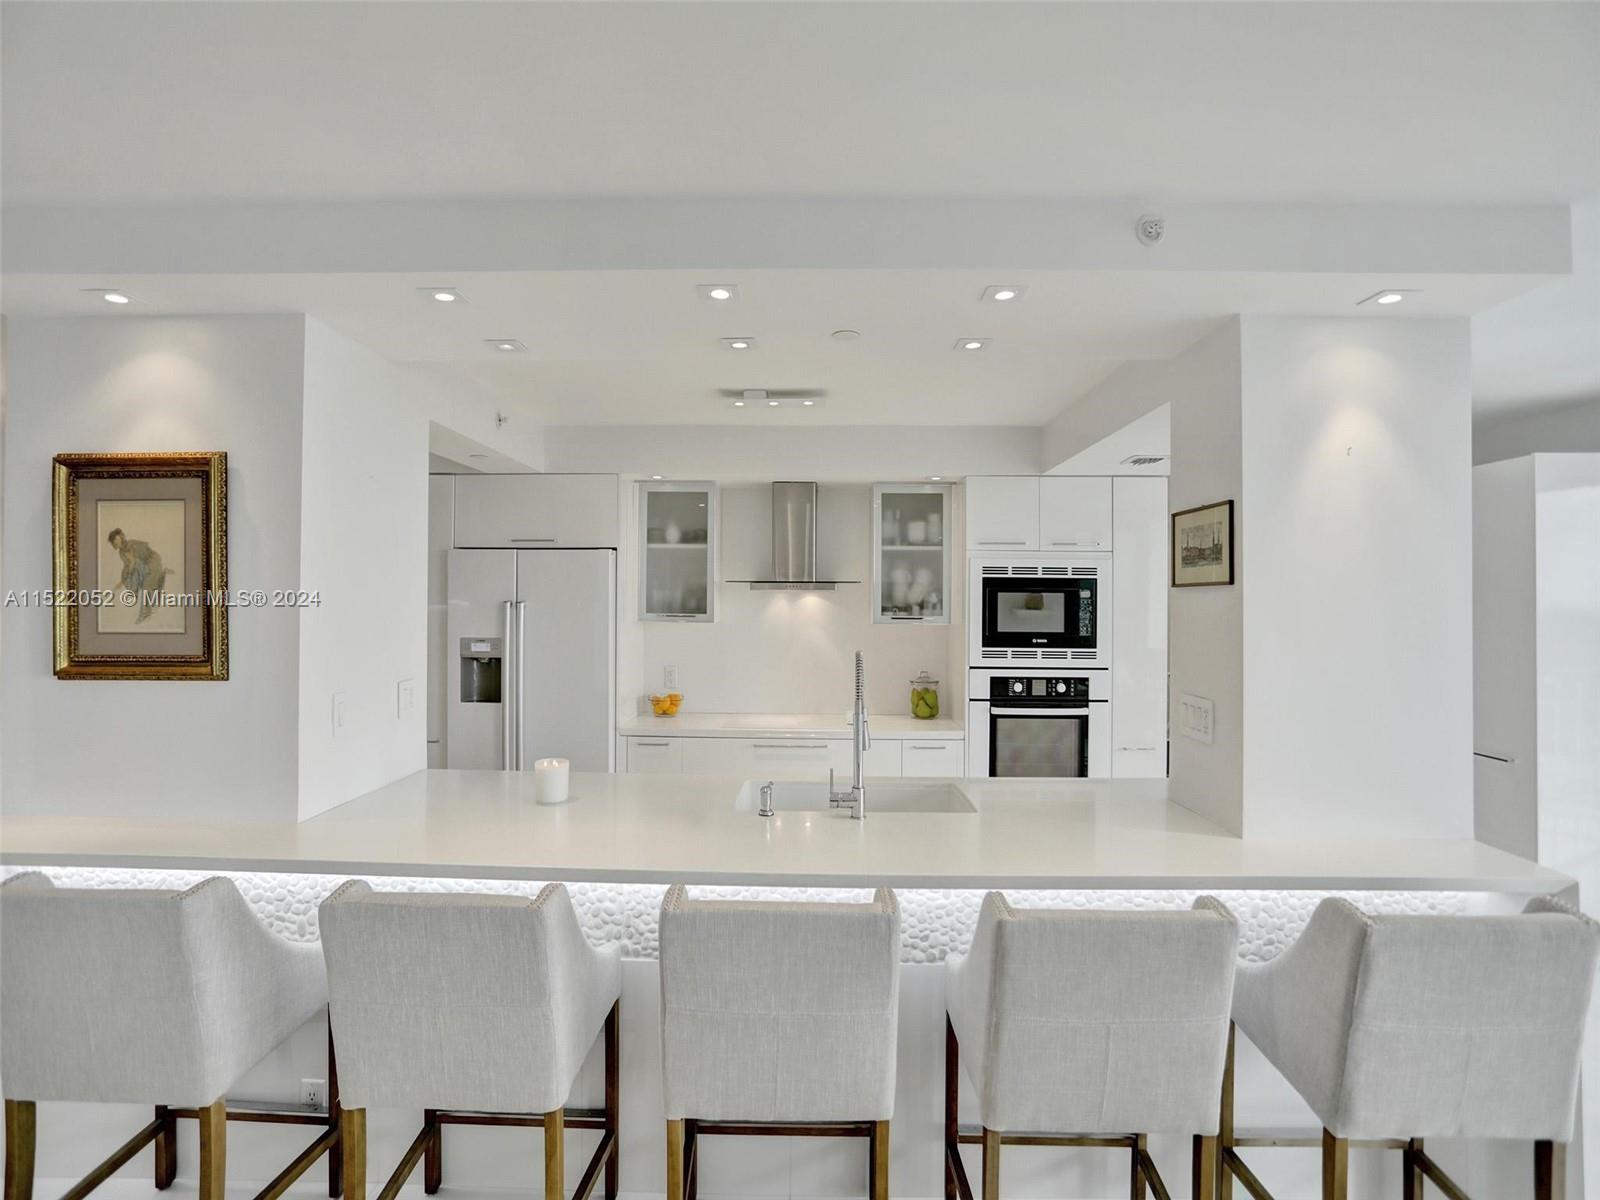 a kitchen with stainless steel appliances granite countertop a table and chairs